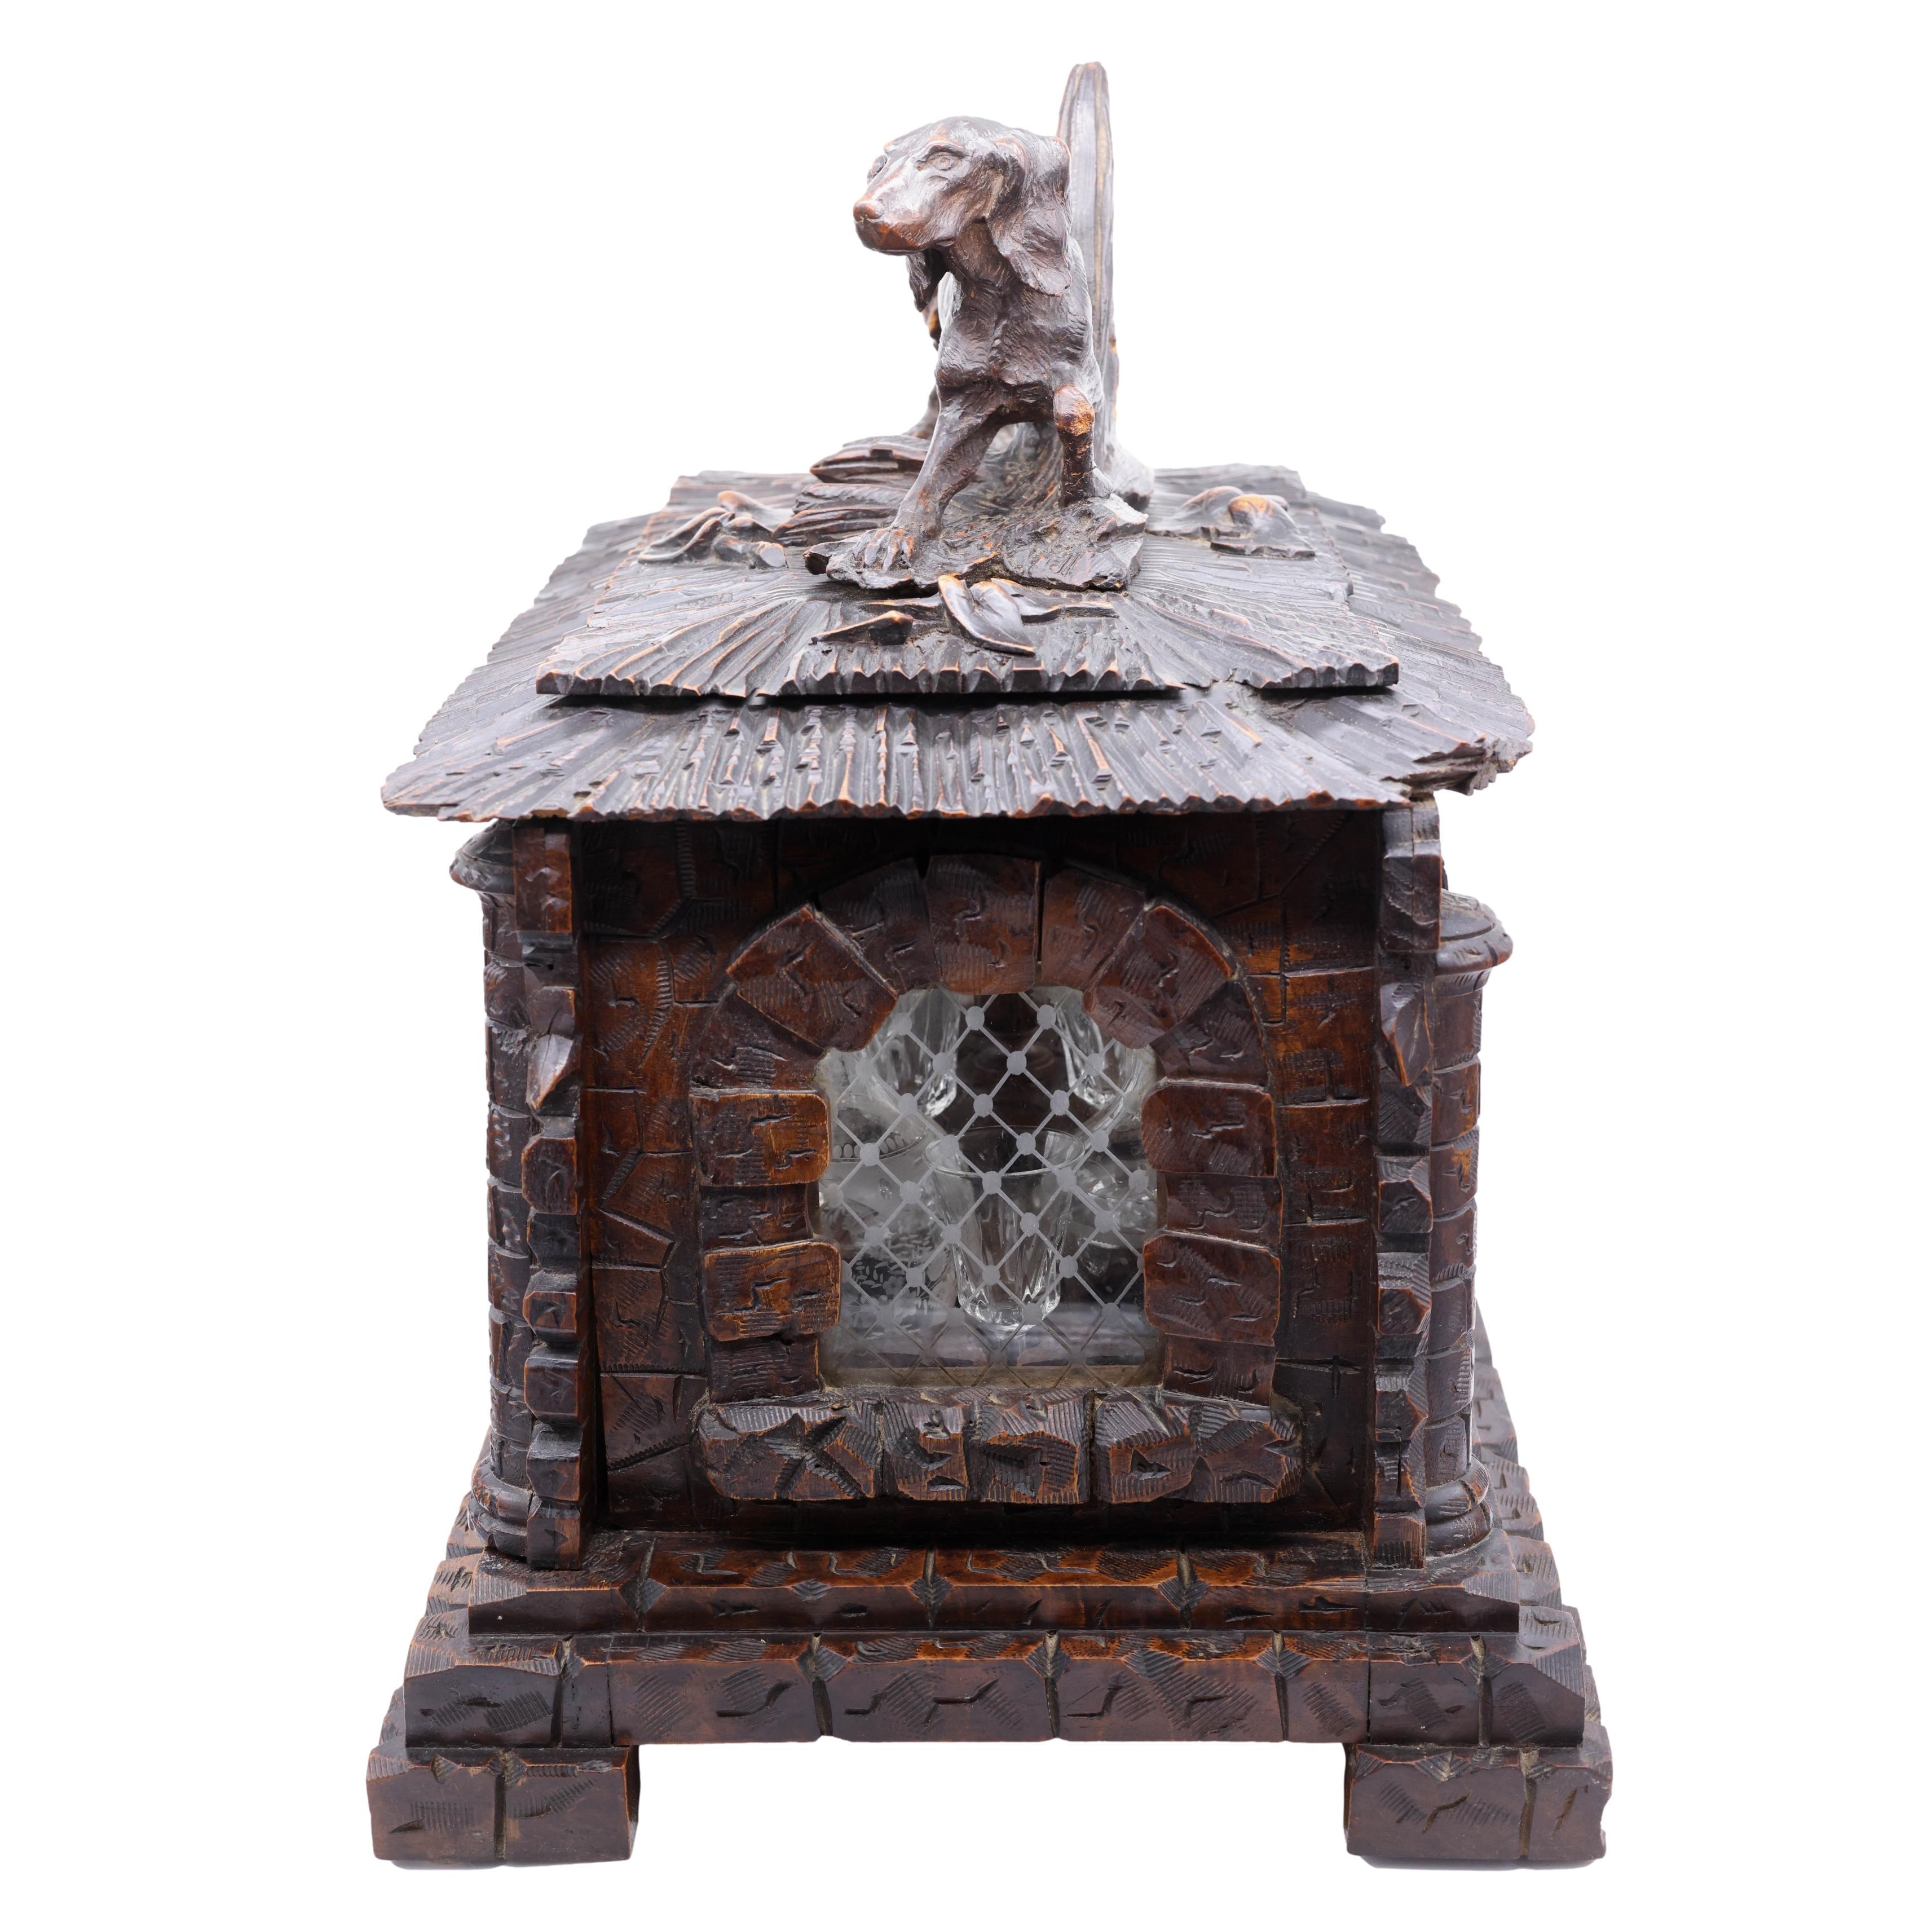 19th Century Black Forest Carved Tantalus Set with Sporting Dog, Solid Walnut, Swiss, c. 1885